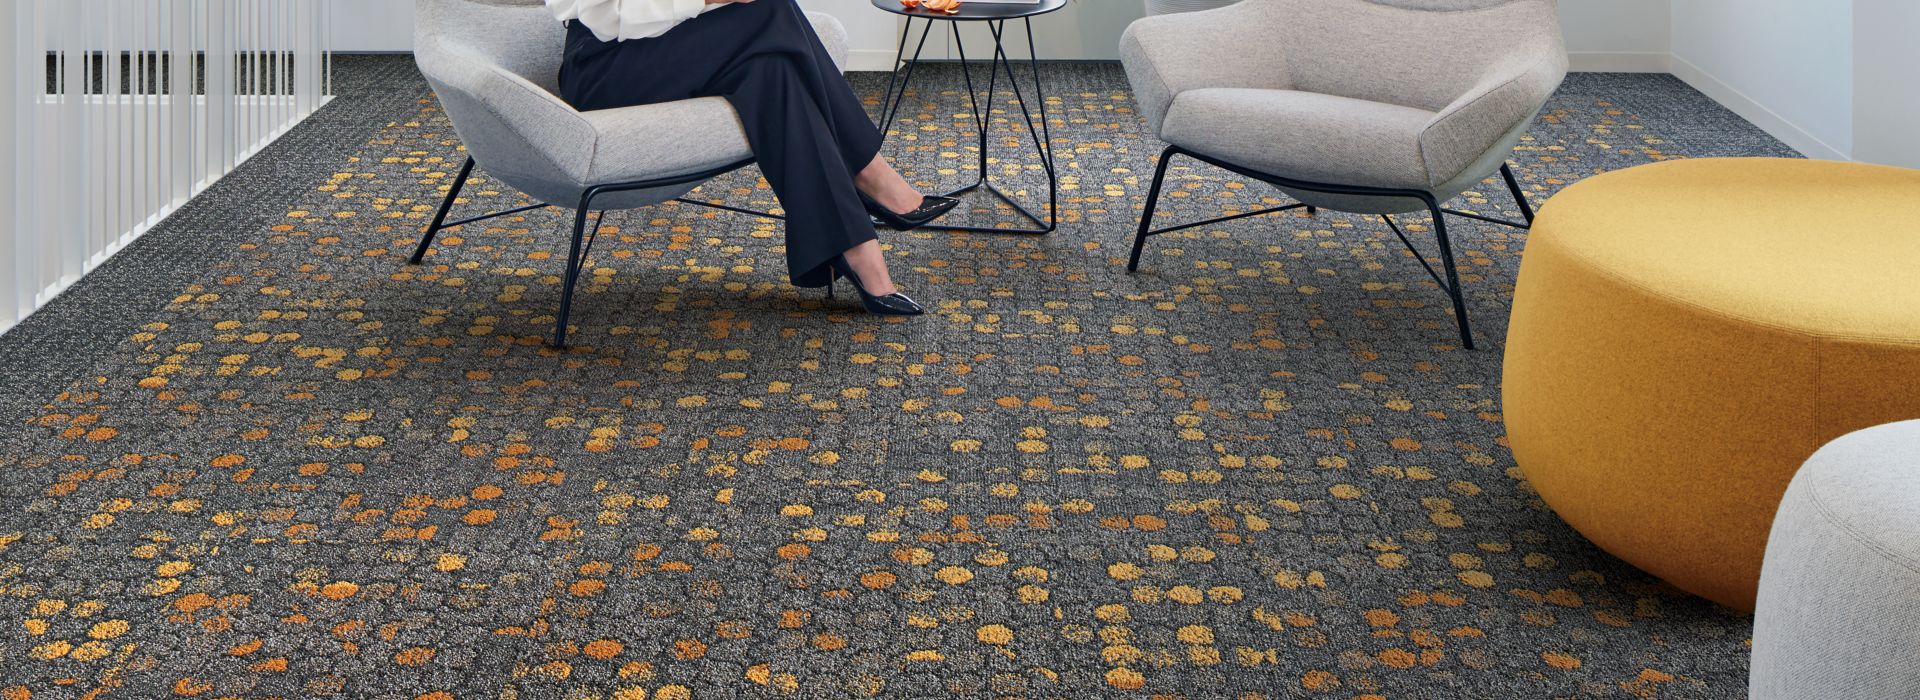 image Interface Broome Street and Wheler Street carpet tile in lobby area with woman seated numéro 1